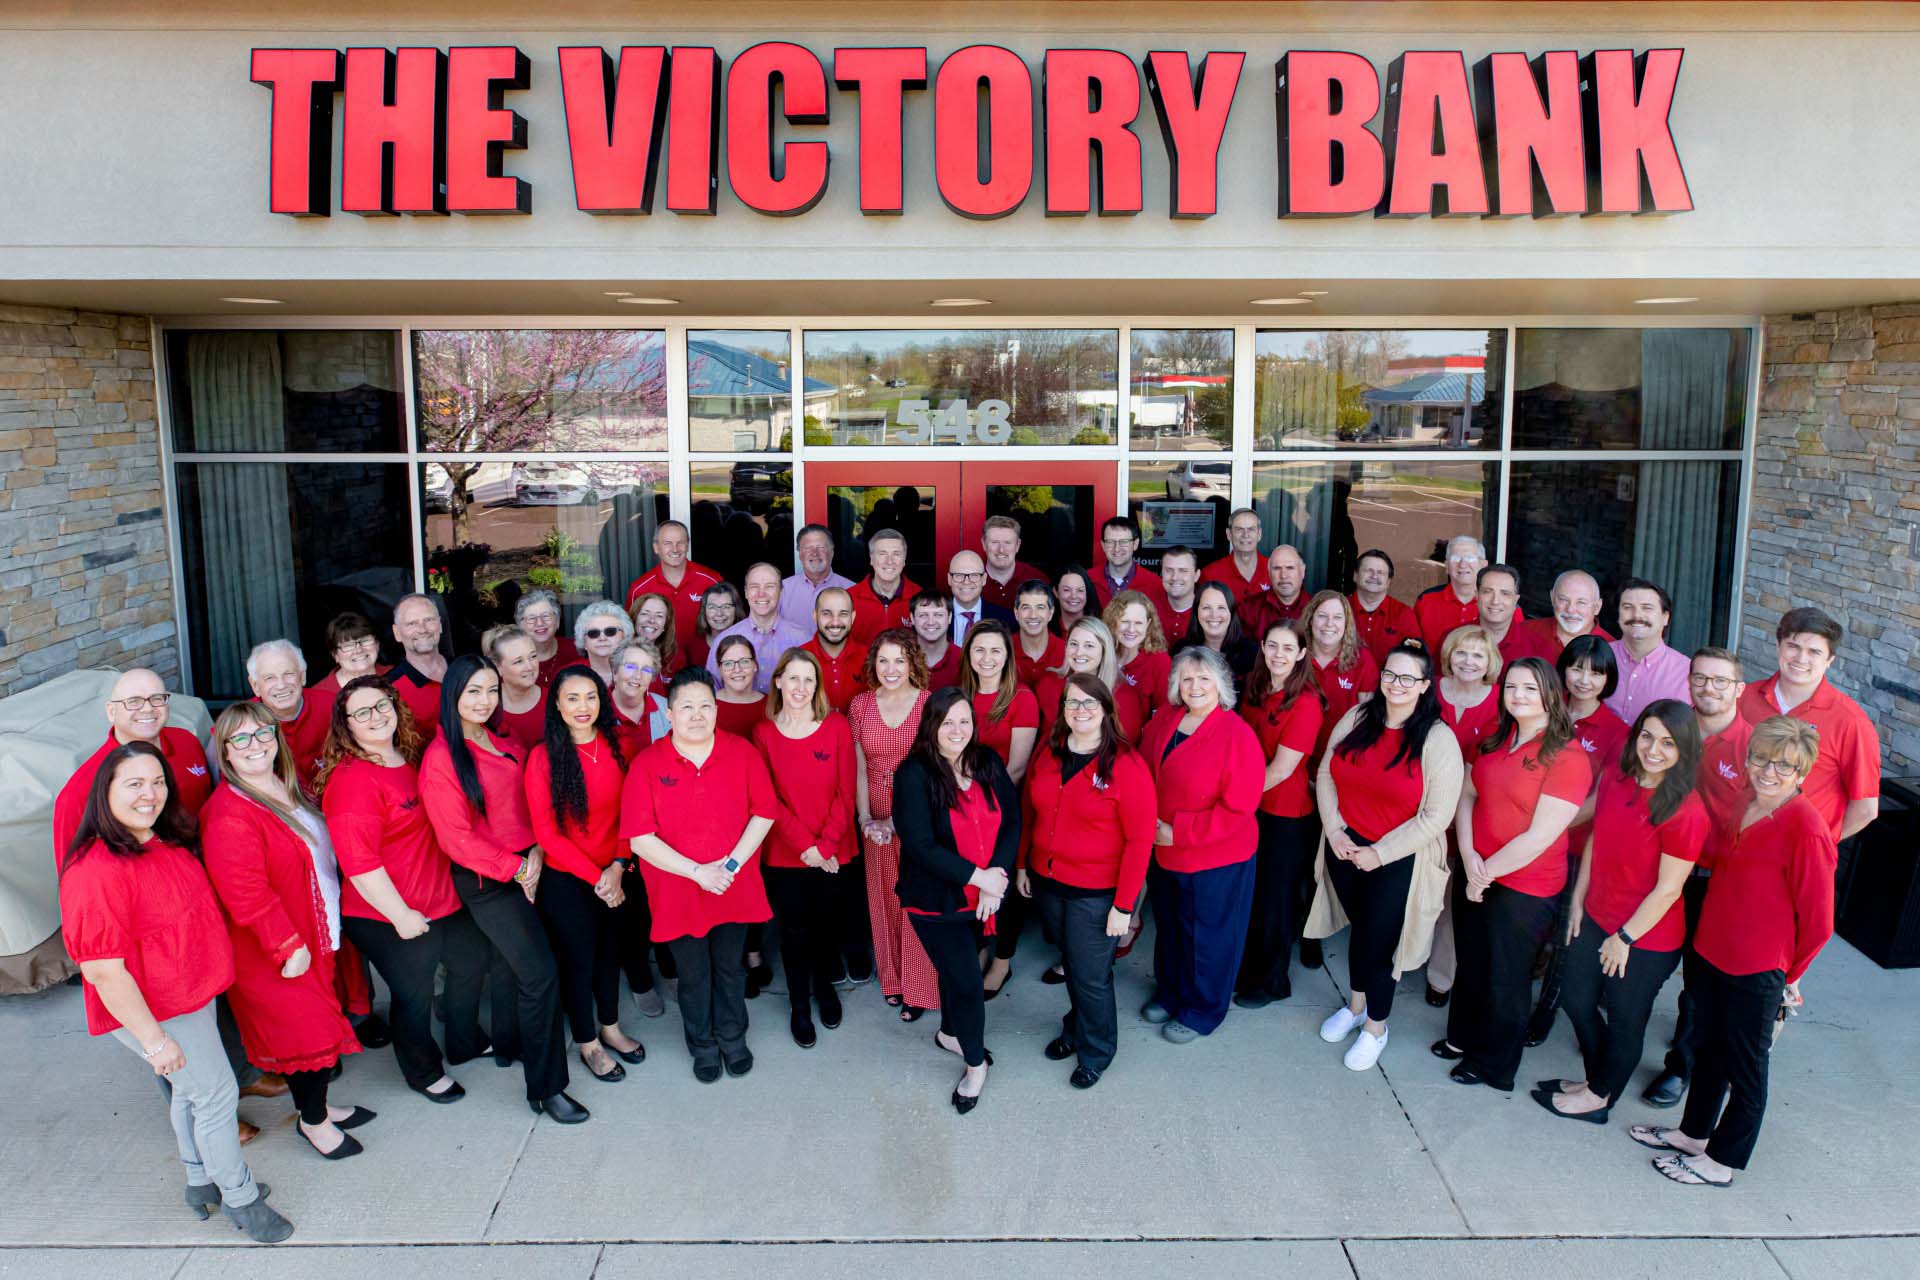 The Victory Bank staff group photo